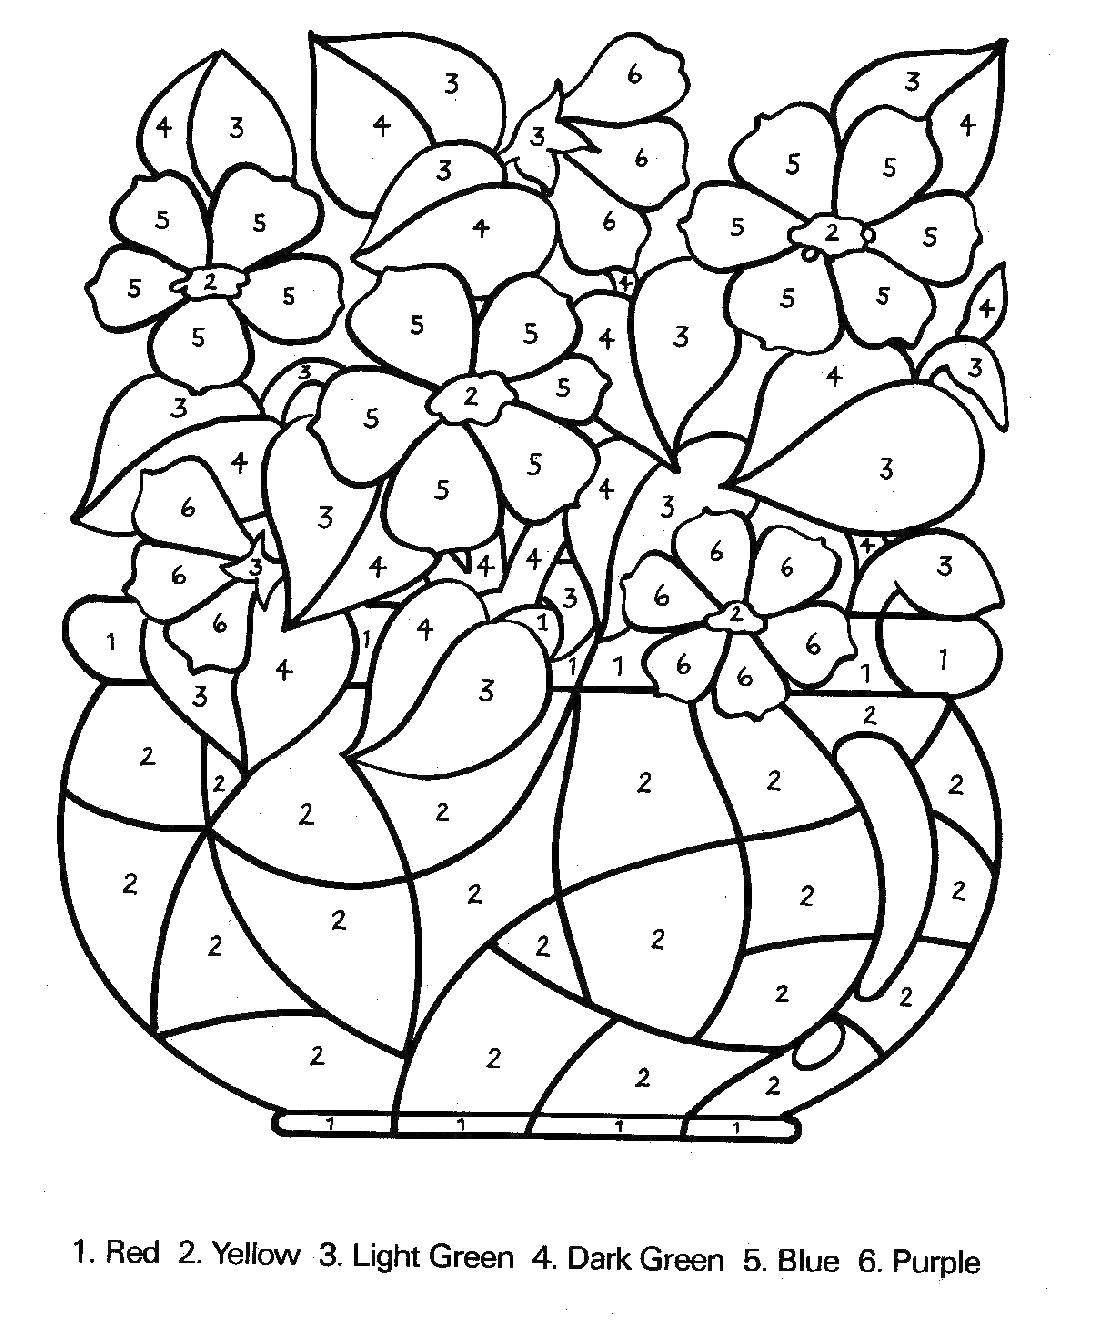 Coloring By the numbers vase with flower. Category That number. Tags:  Numbers, flowers, vase.